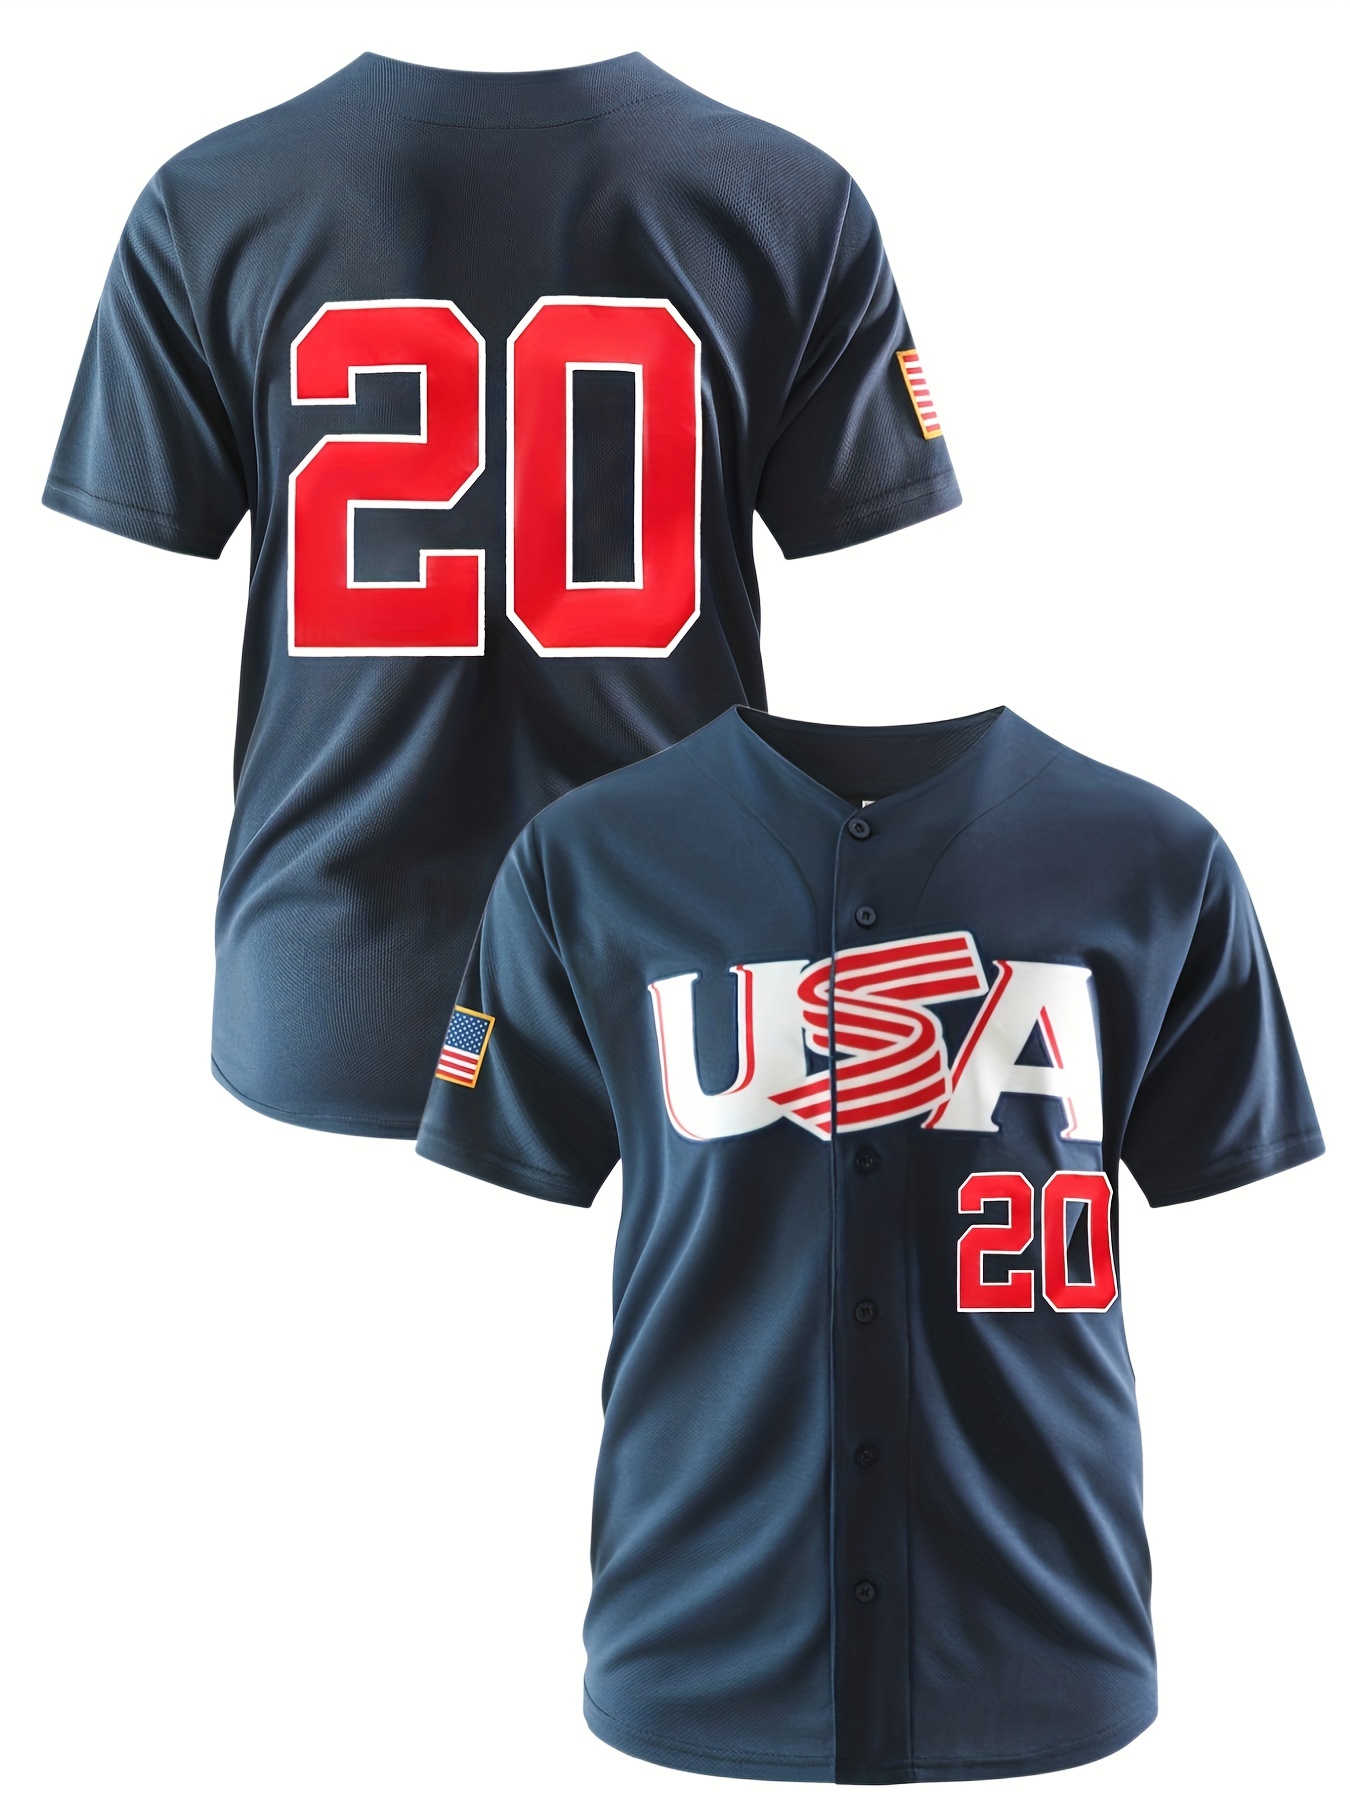 Men's #20 USA Baseball Jersey, Retro Classic Baseball Shirt, Breathable  Embroidery Button Up Sports Uniform For Party Festival Gifts